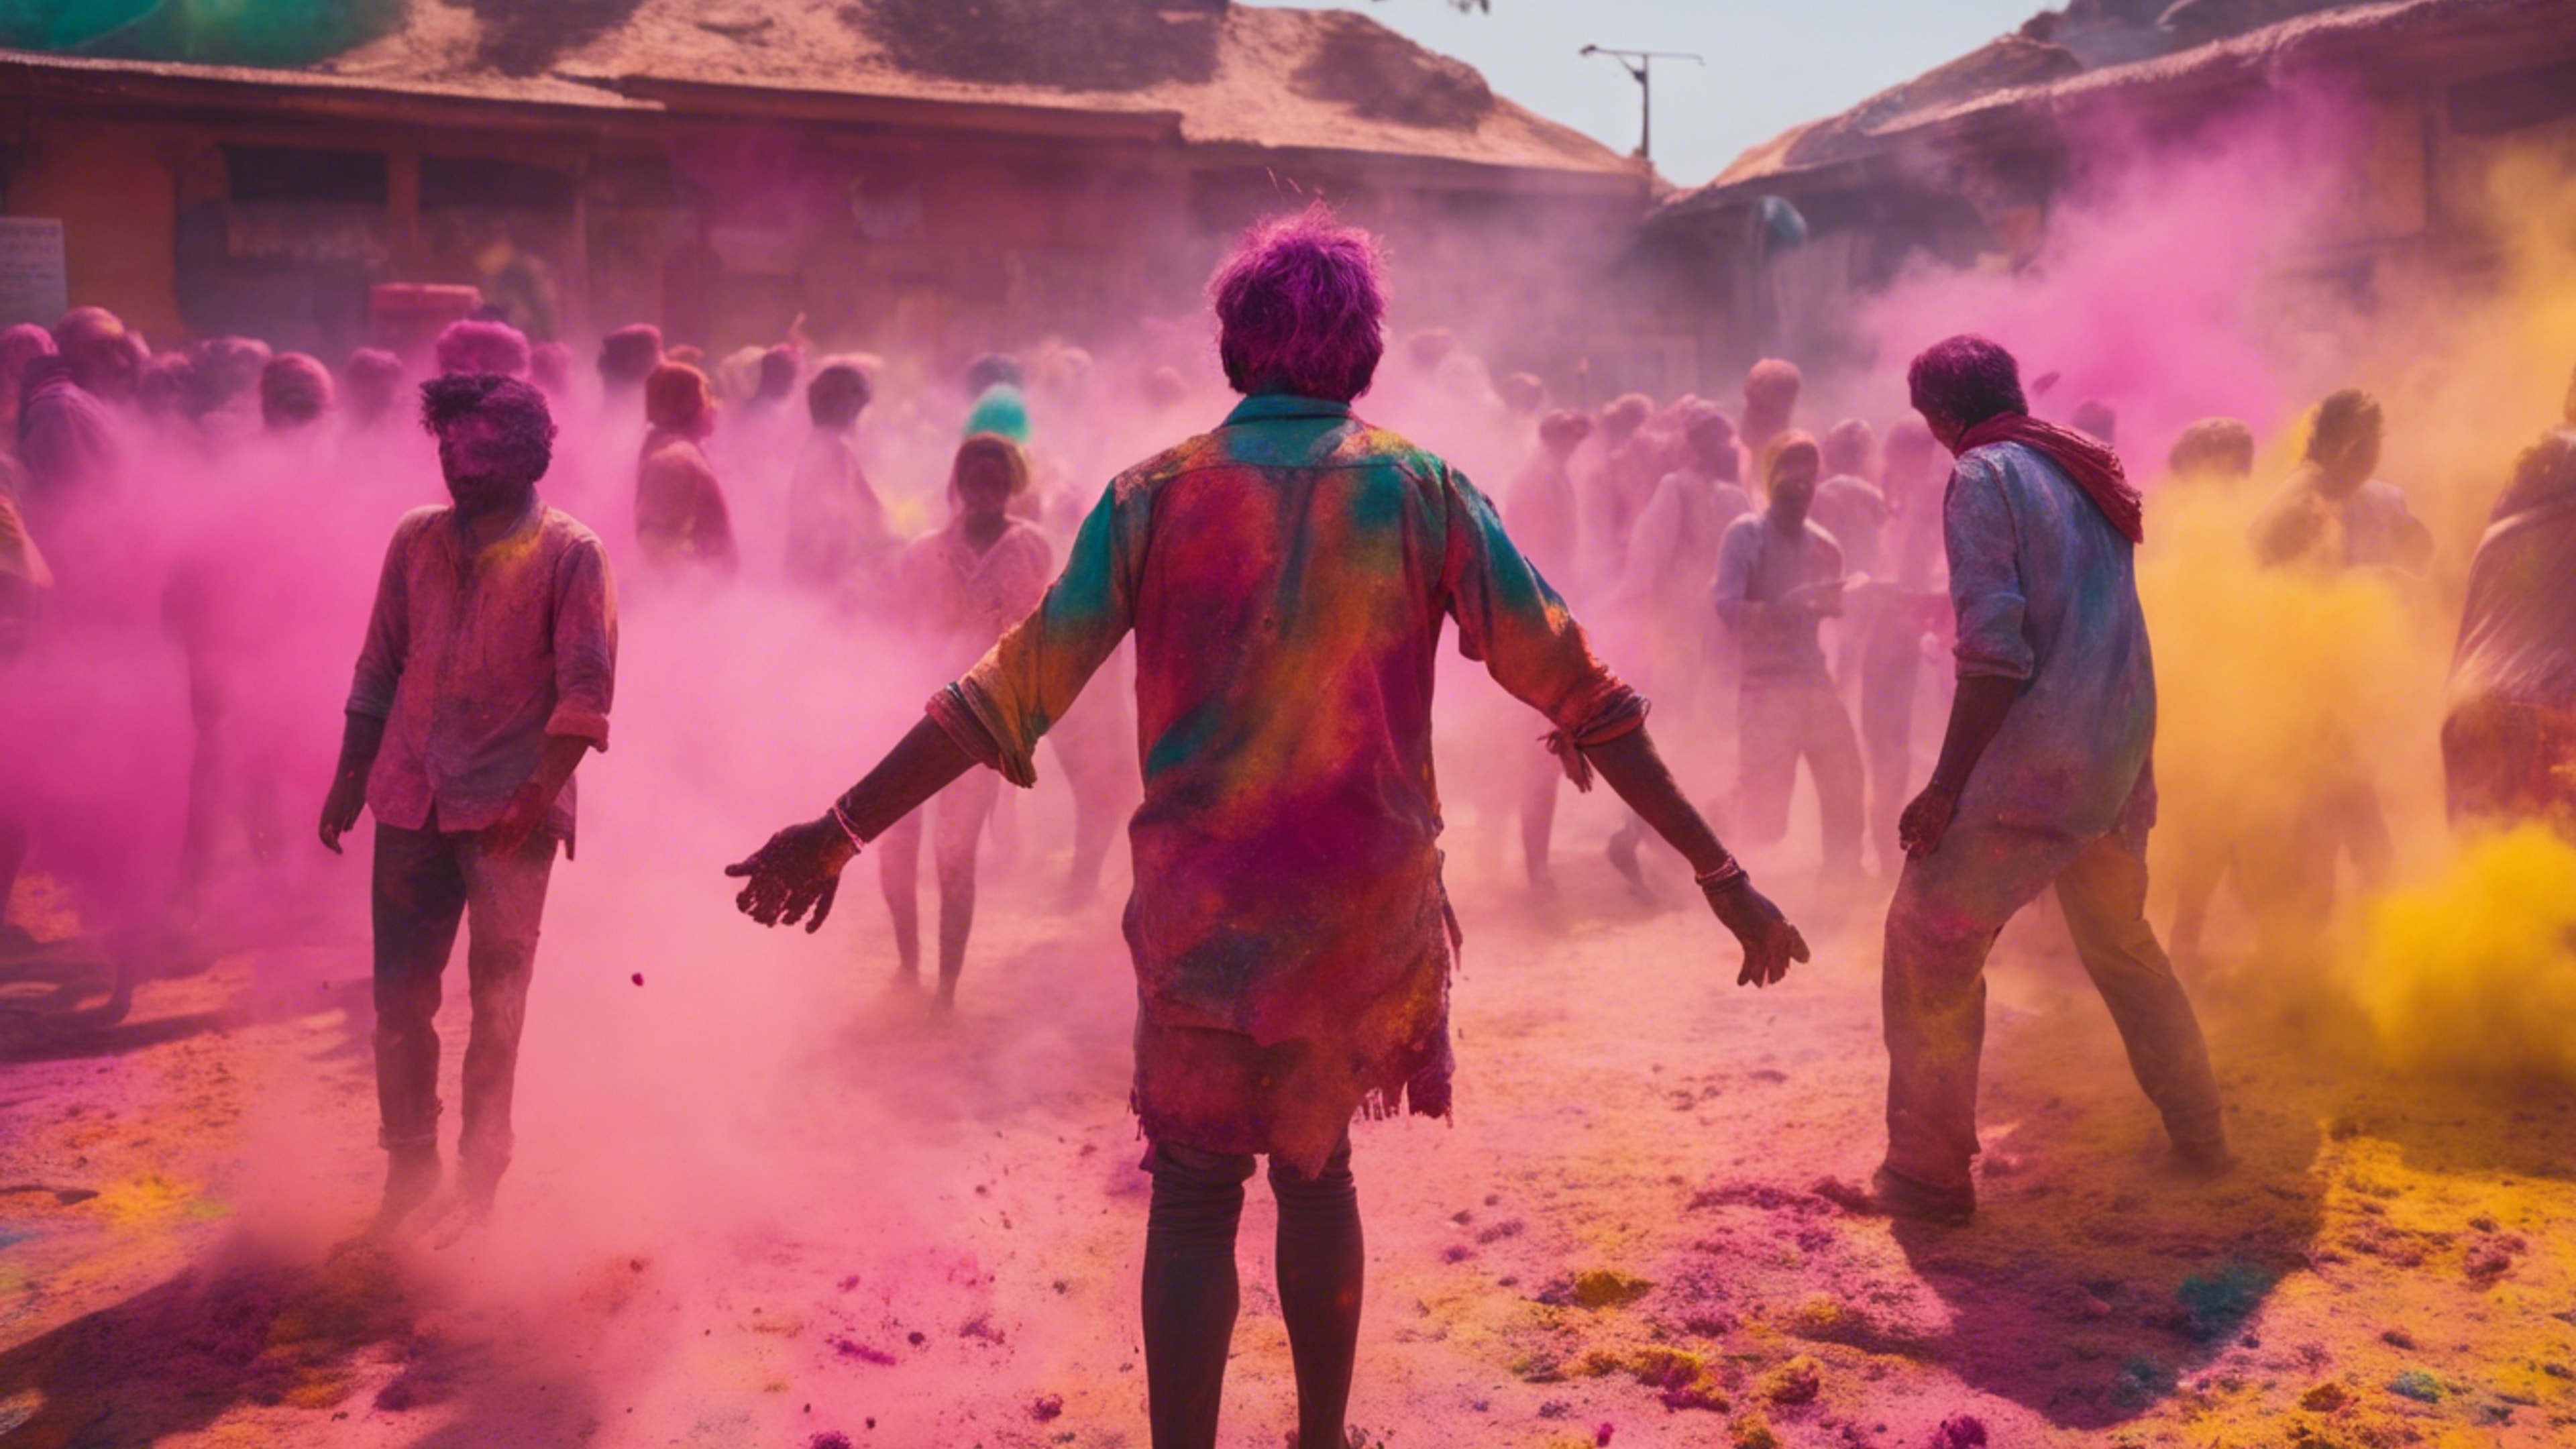 A vibrant and colorful Holi festival with people throwing powdered colors and laughing in the backdrop of an old Indian city. ផ្ទាំង​រូបភាព[6dae05cbdf264a67bd16]